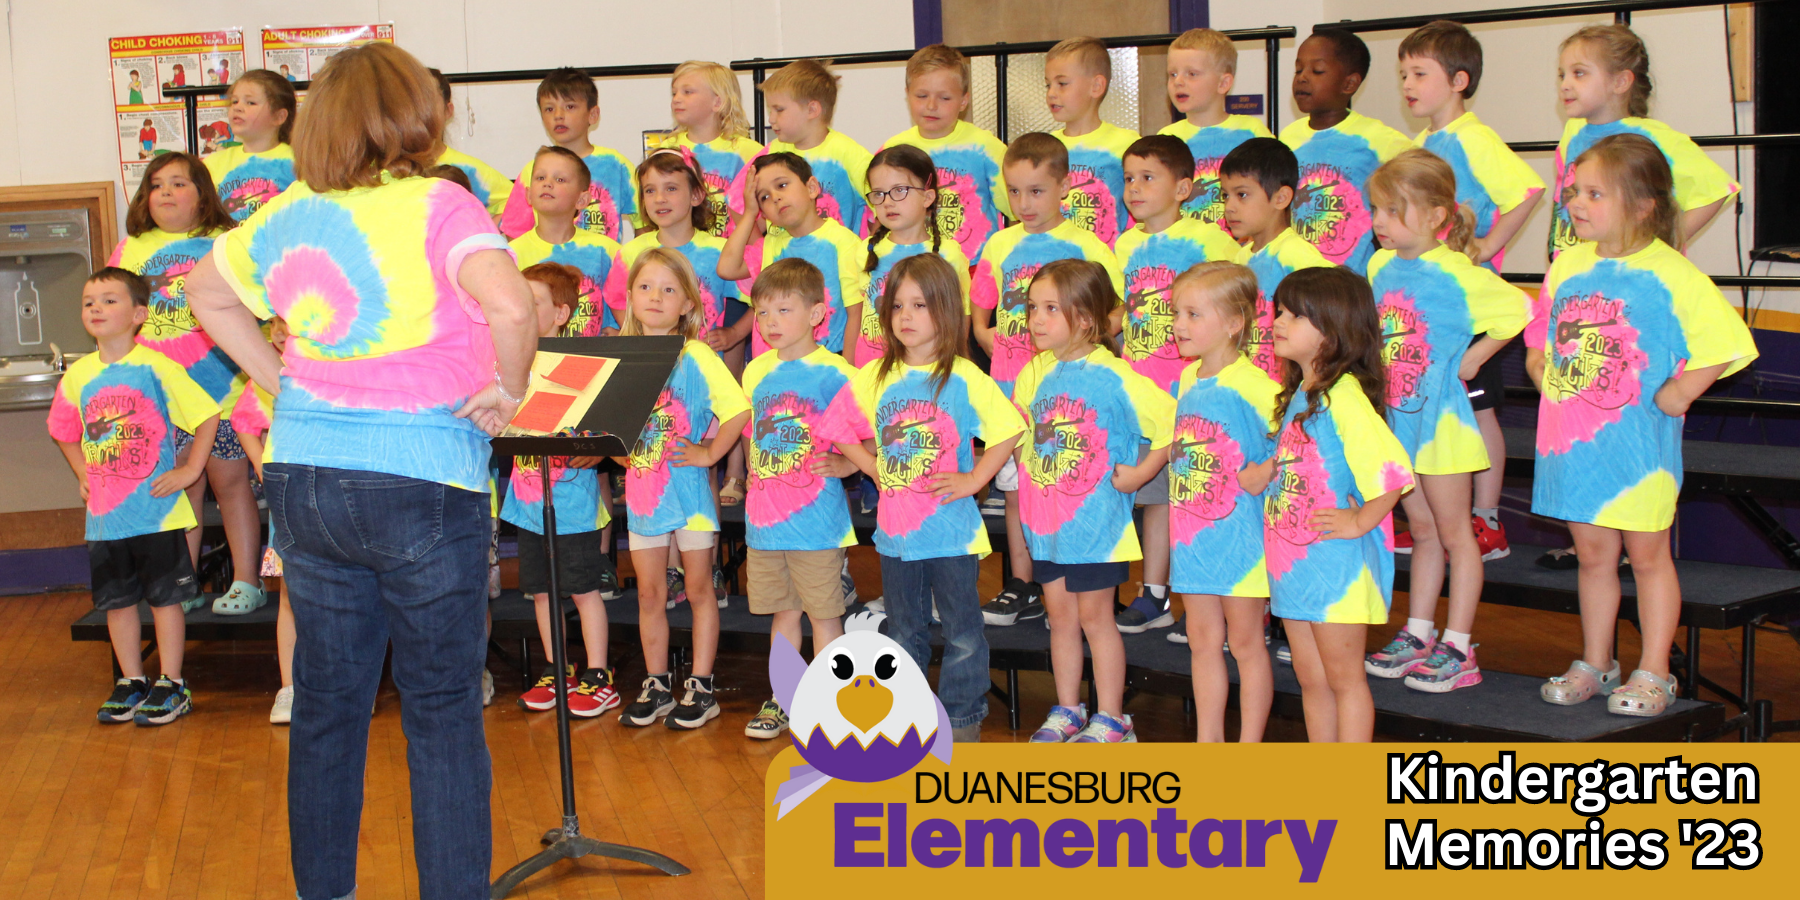 a group of young students wearing tie dye shirts standing on risers, with a logo of an eagle and the words Duanesburg Elementary